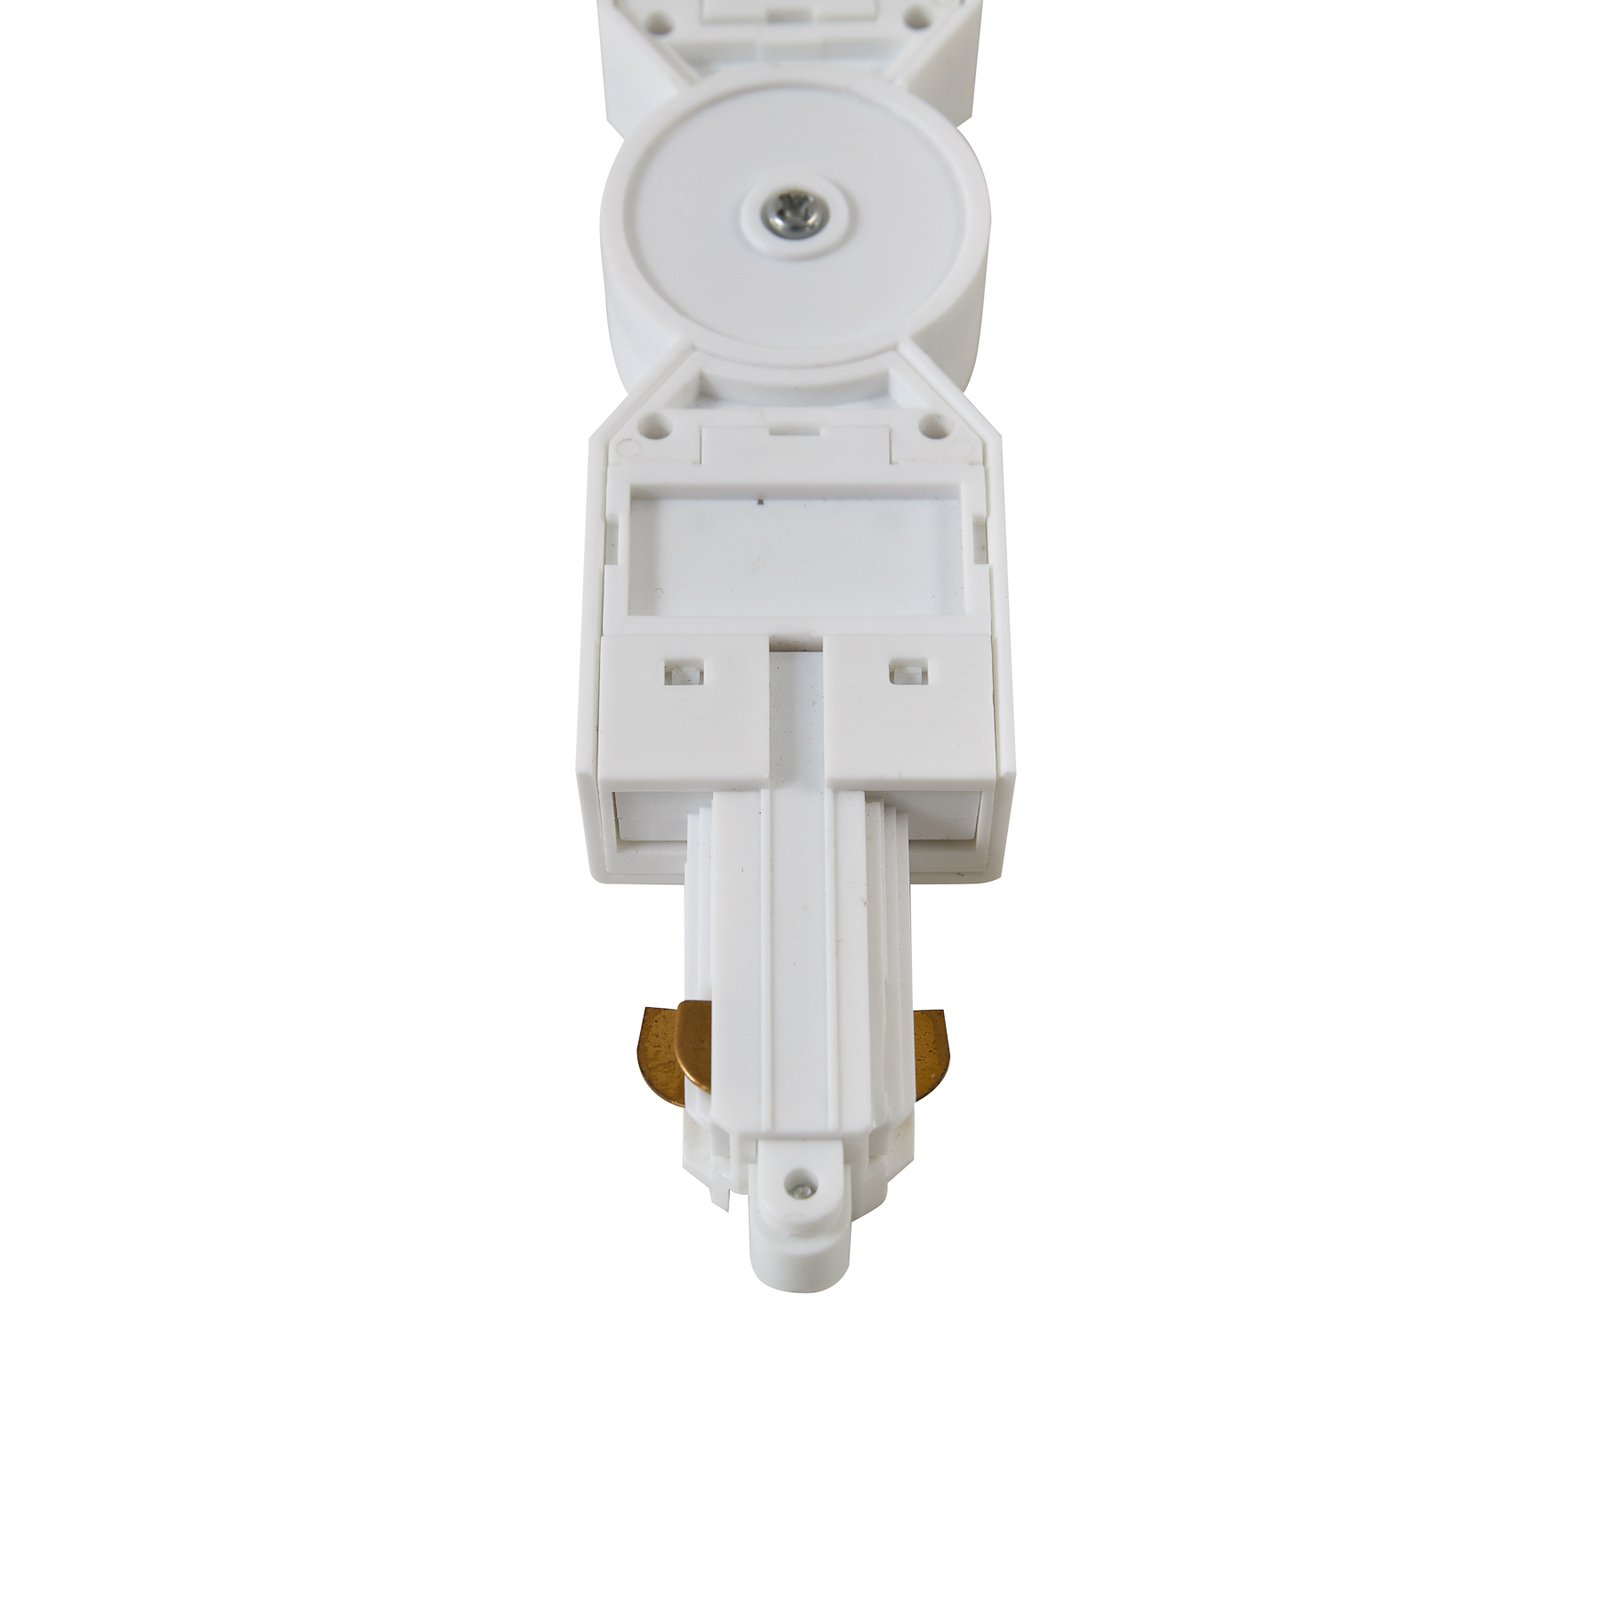 Lindby connector Linaro, white, adjustable, 1-phase